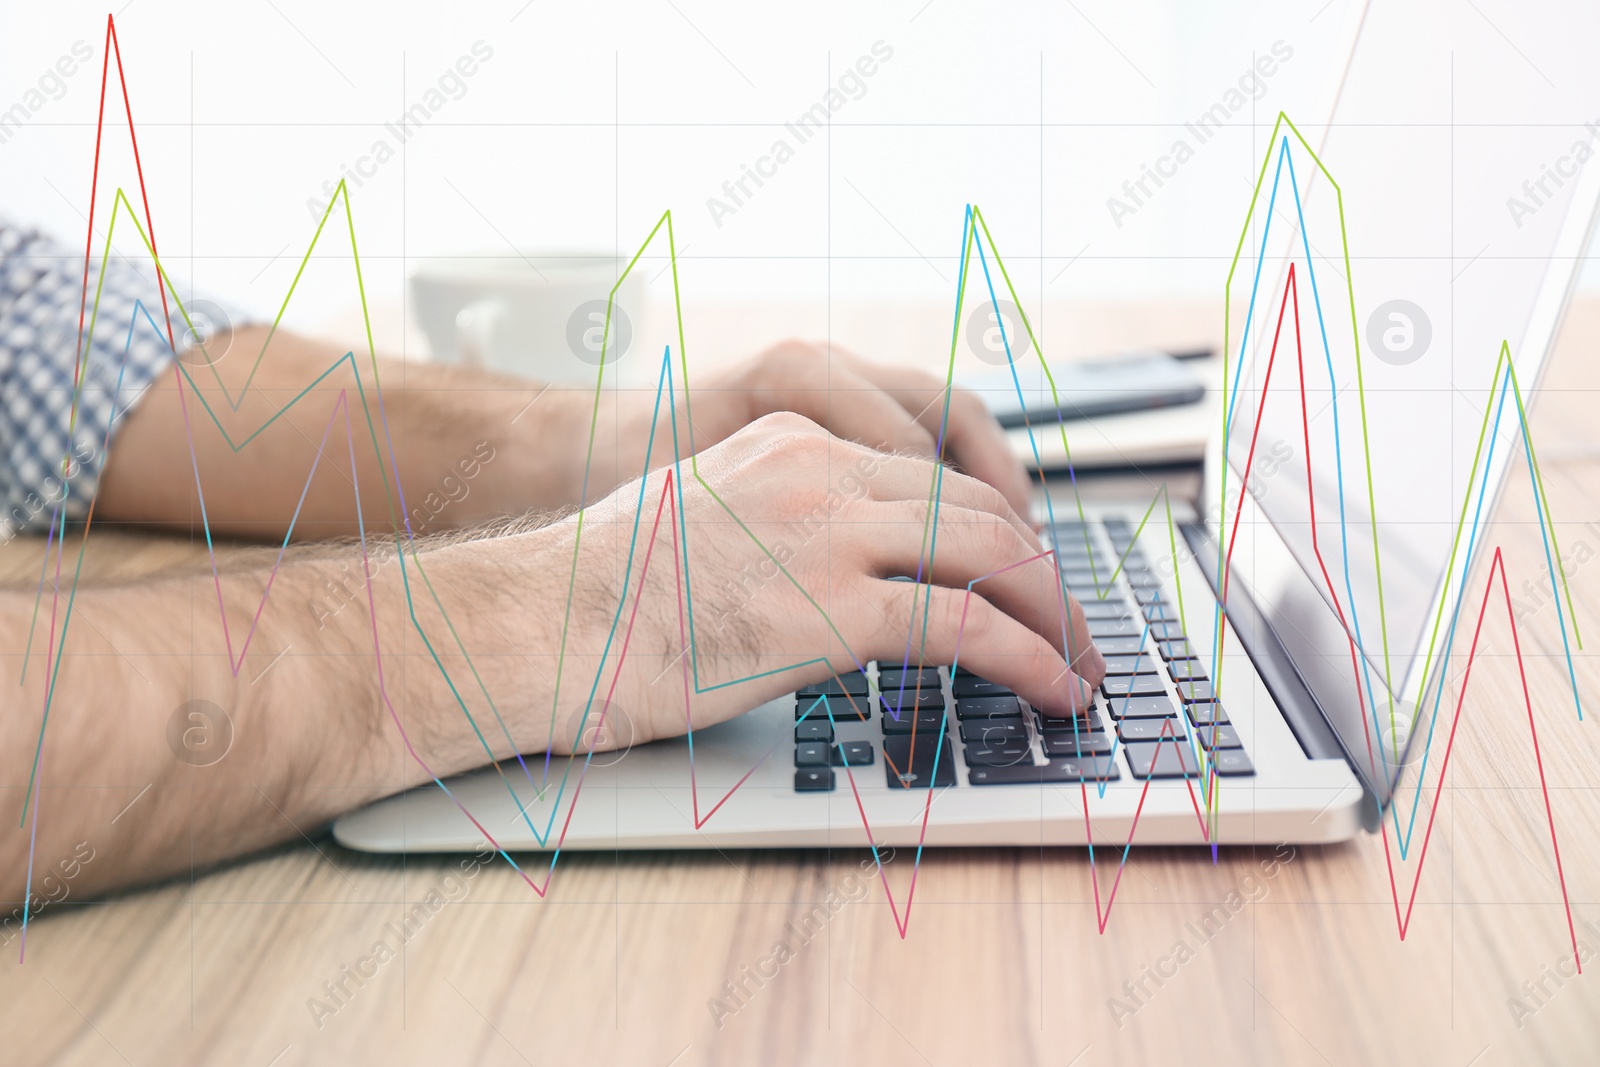 Image of Finance trading concept. Man working with laptop at table and chart, closeup